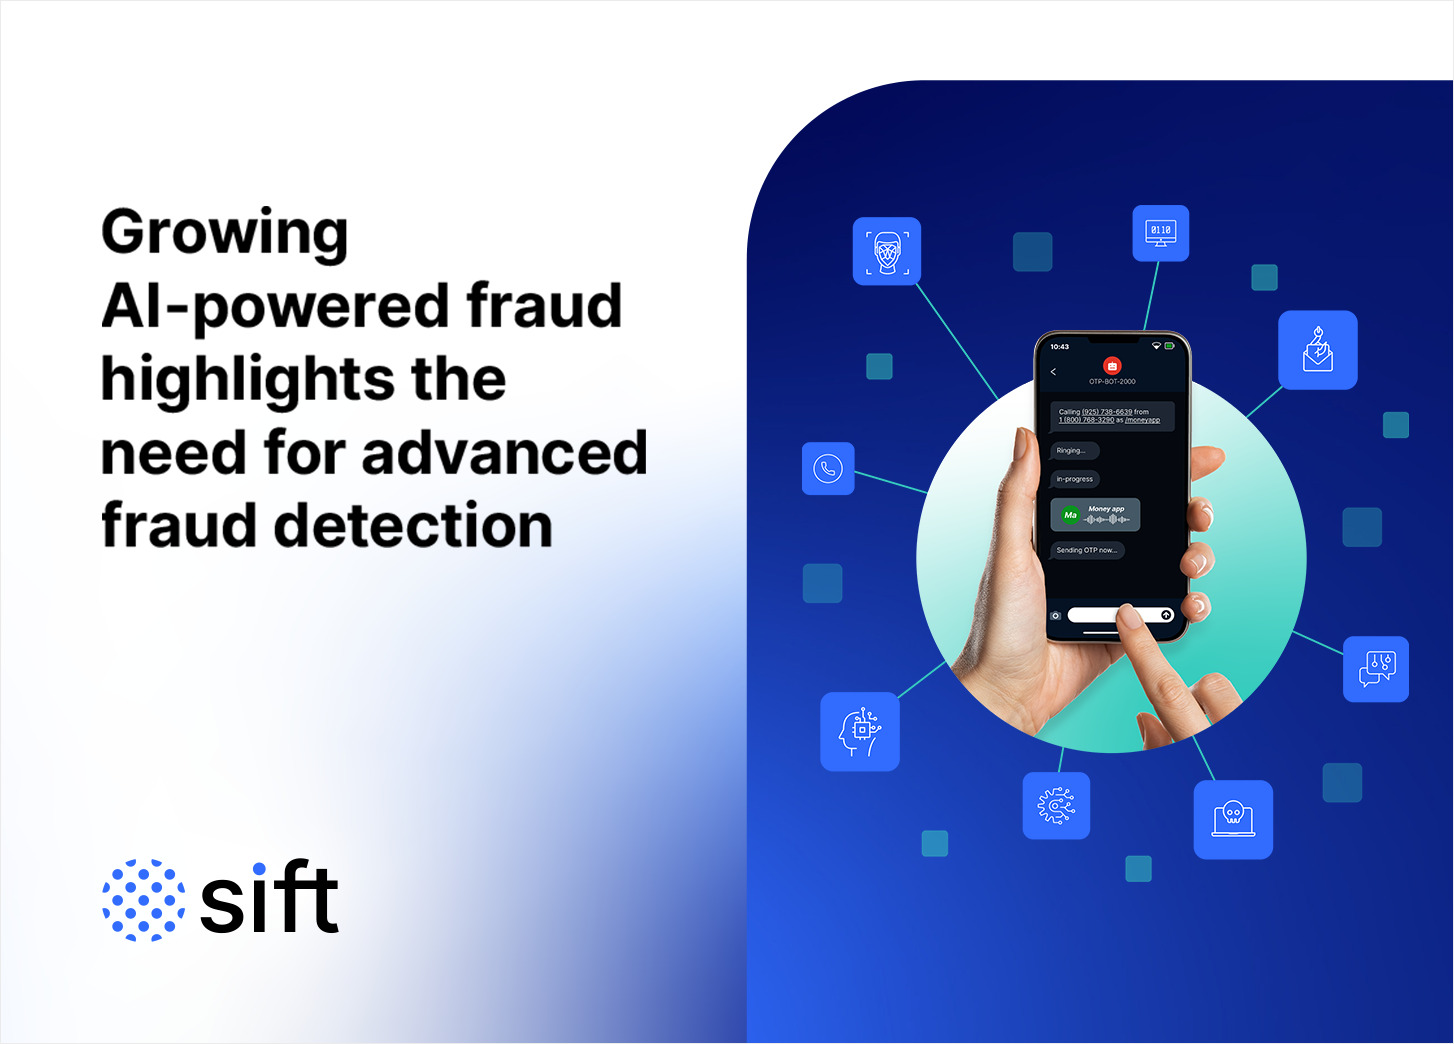 Growing AI-powered fraud highlights the need for advanced fraud detection – Source: securityboulevard.com